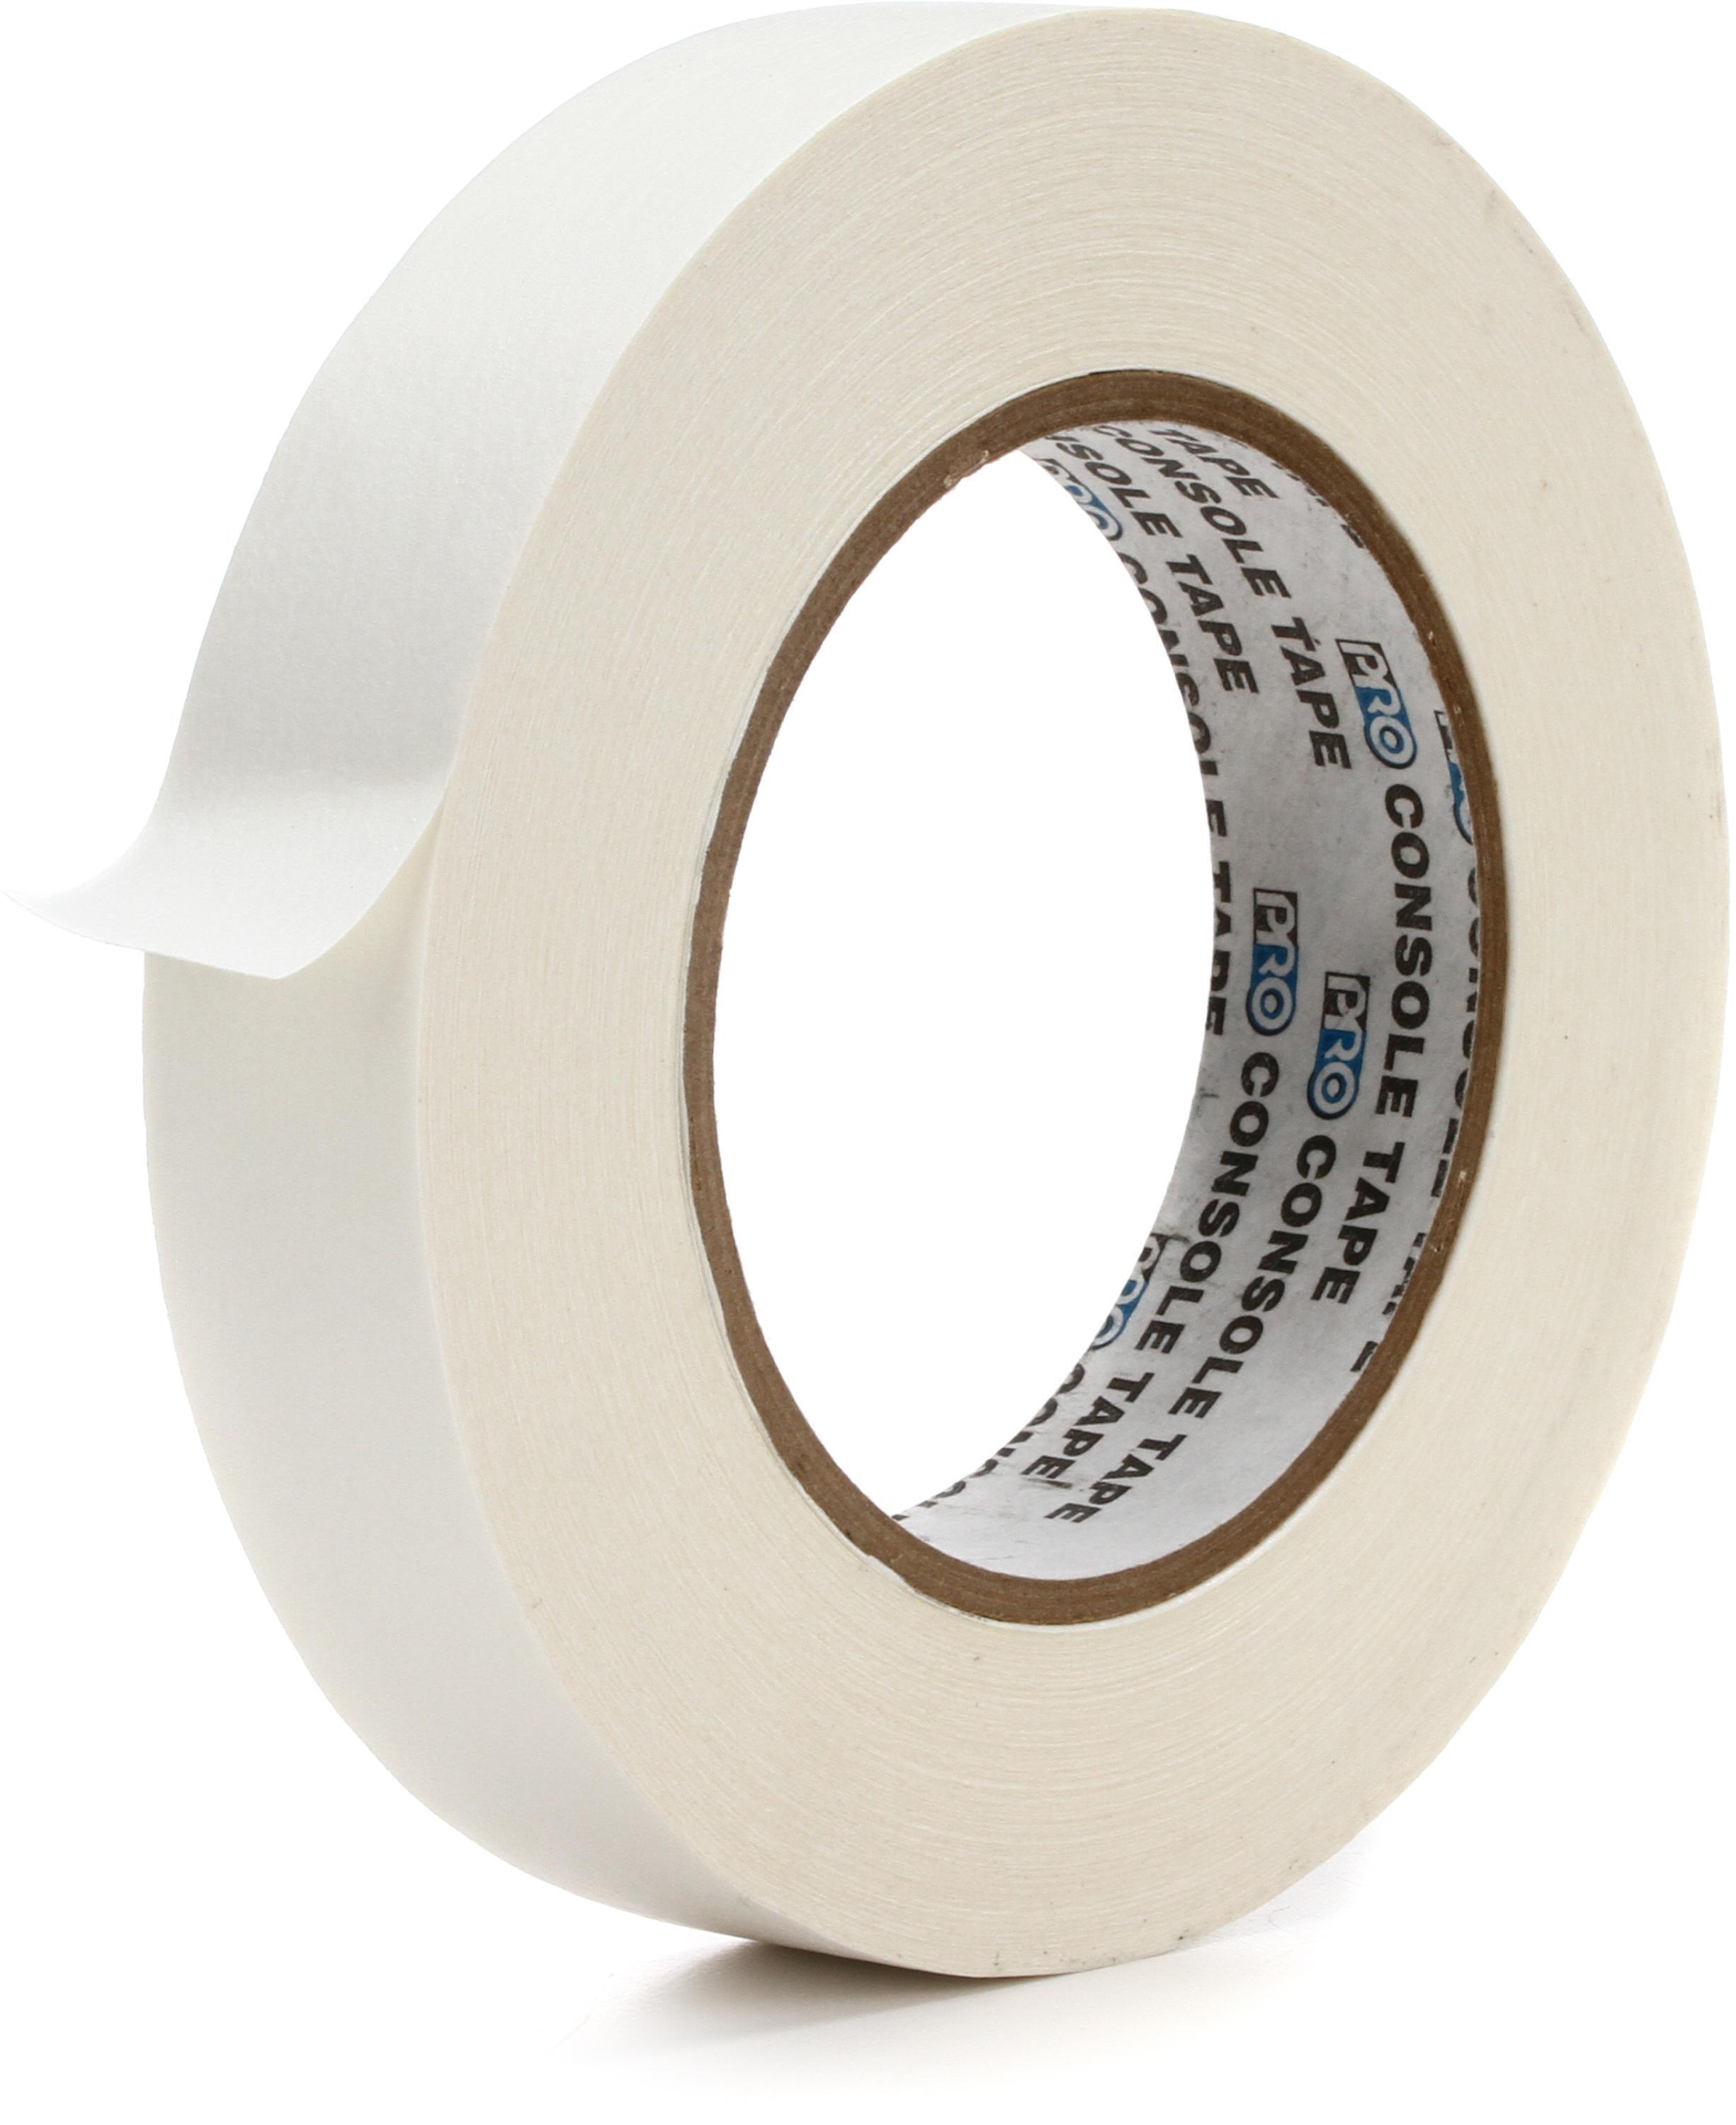 Console Tape, 1 x 60 Yards, White Single (1) Roll (8.99 Each)